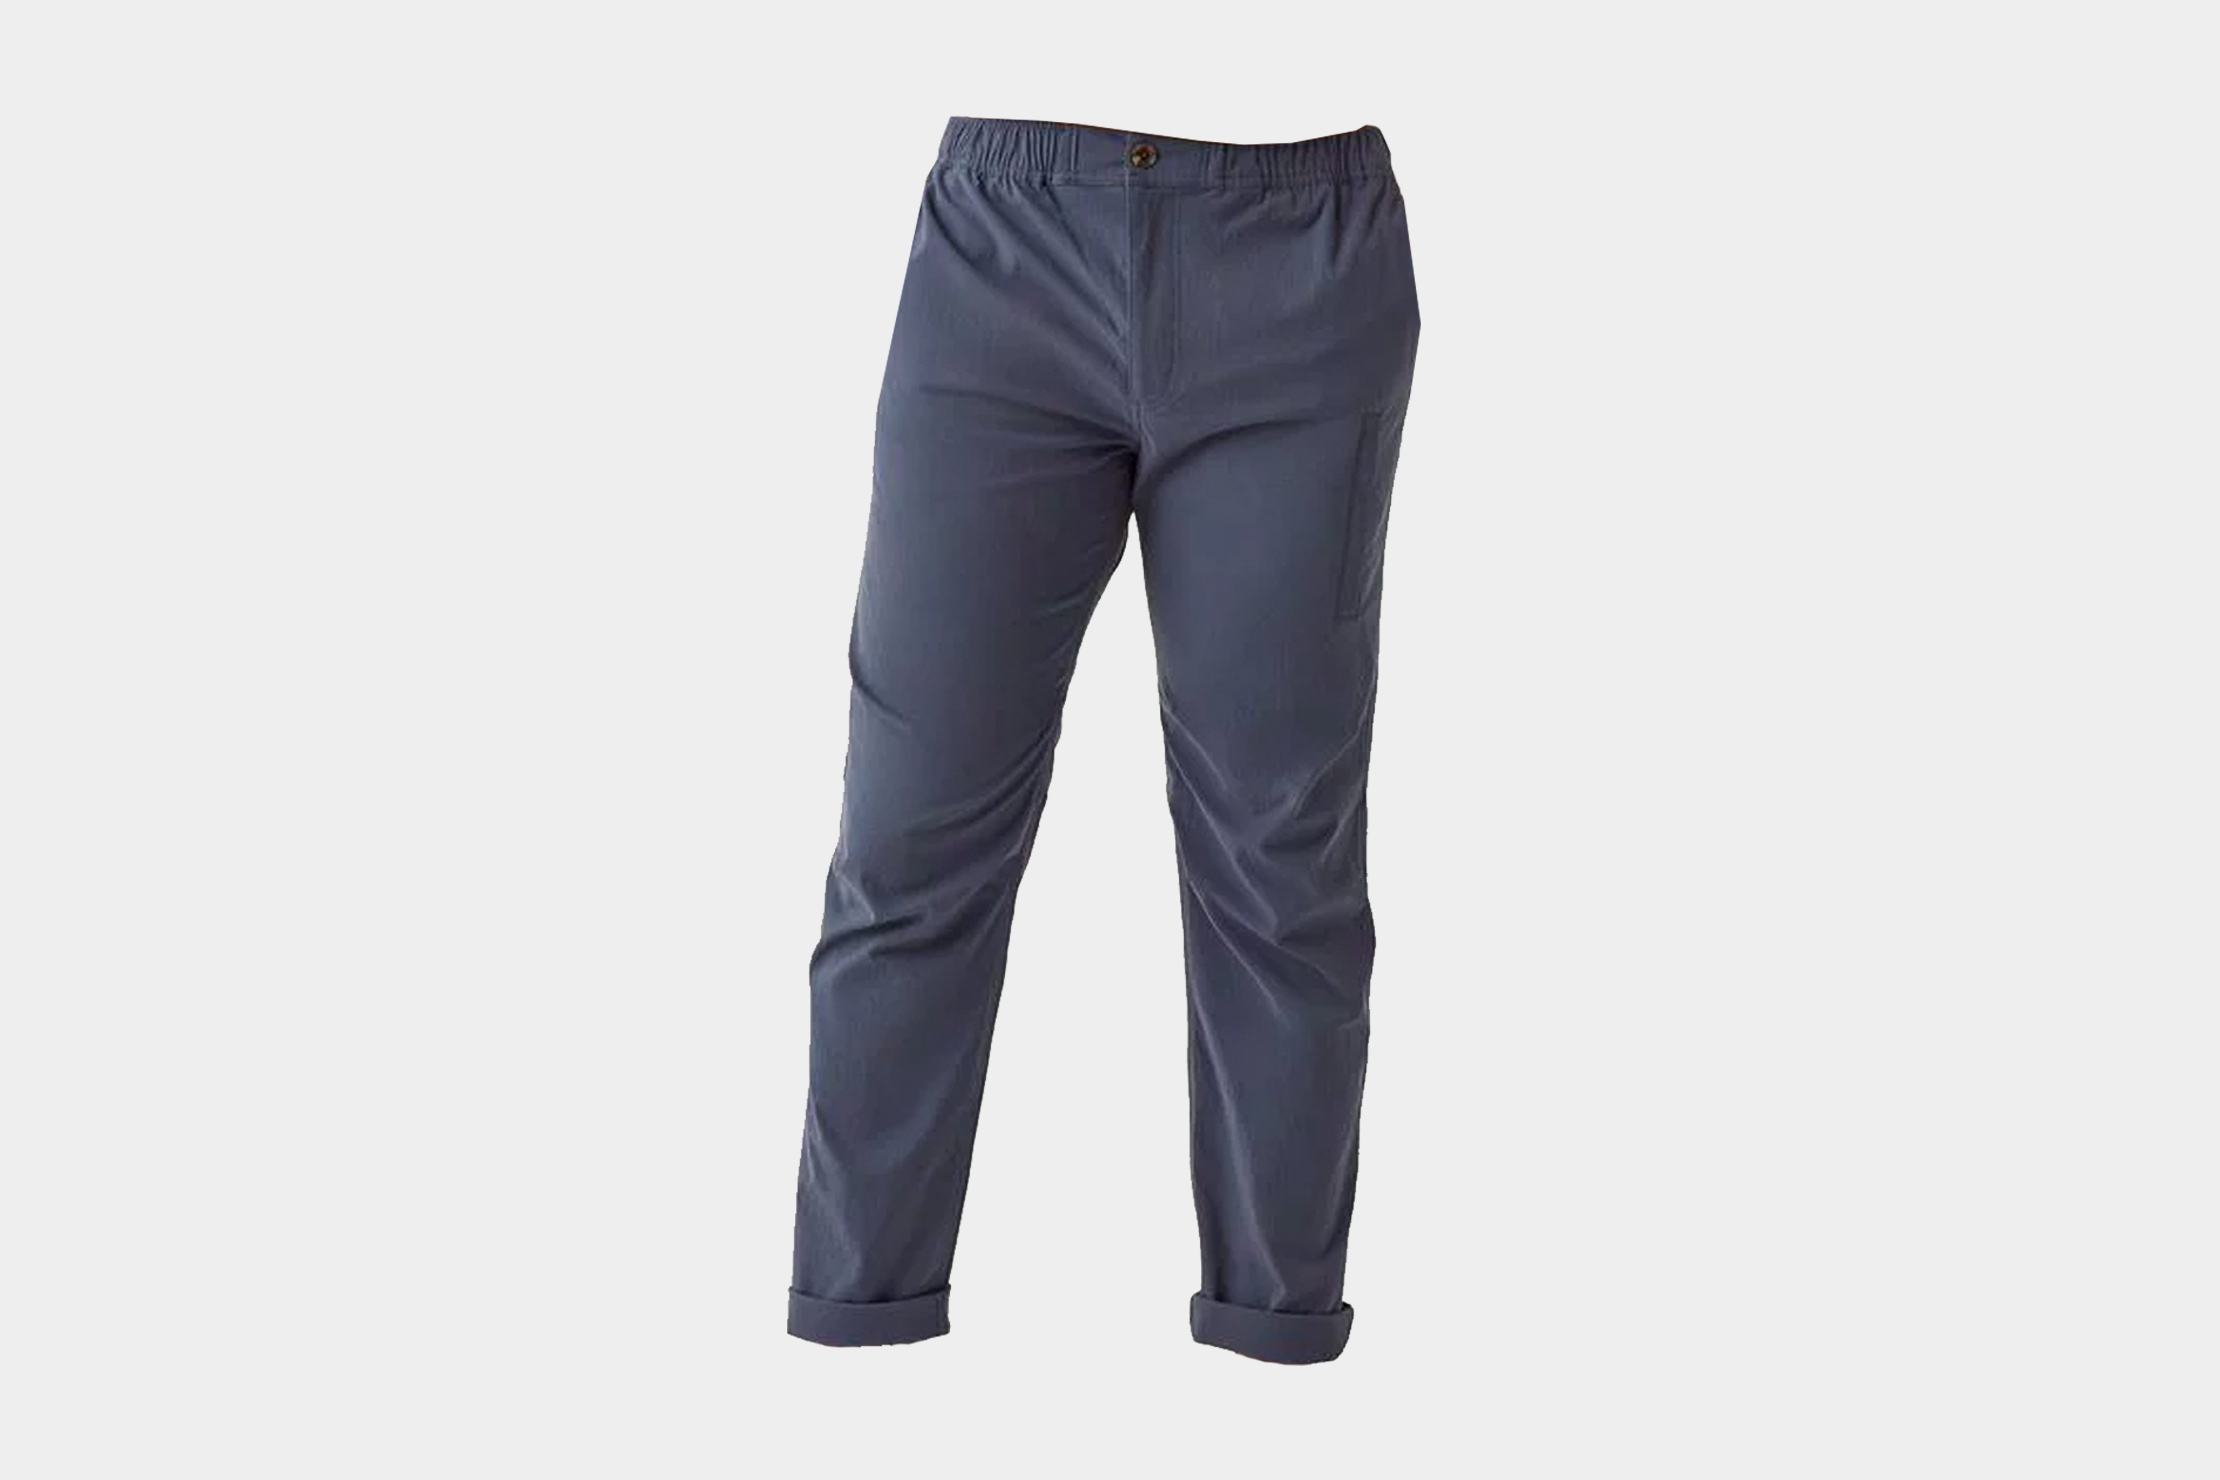 Olivers Compass Pant | Pack Hacker